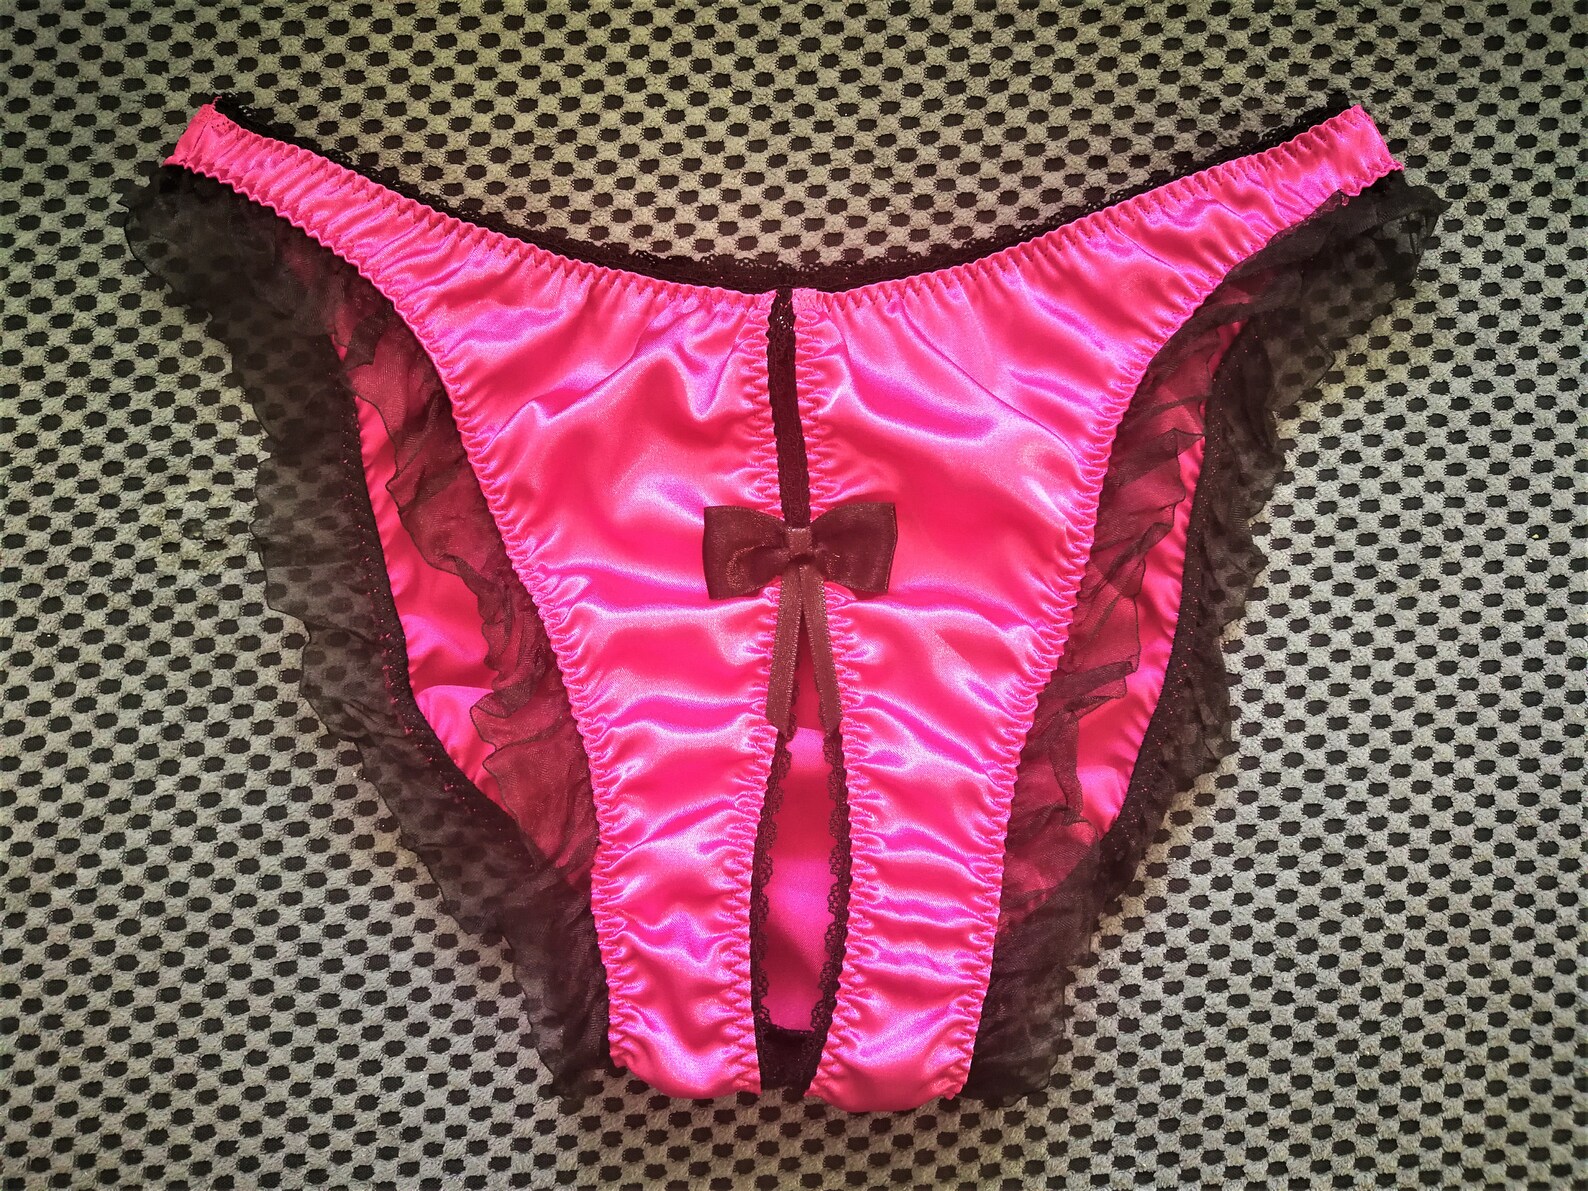 Crotchless Lingerie Naughty Lingerie Crotchless Panties Pink Etsy 